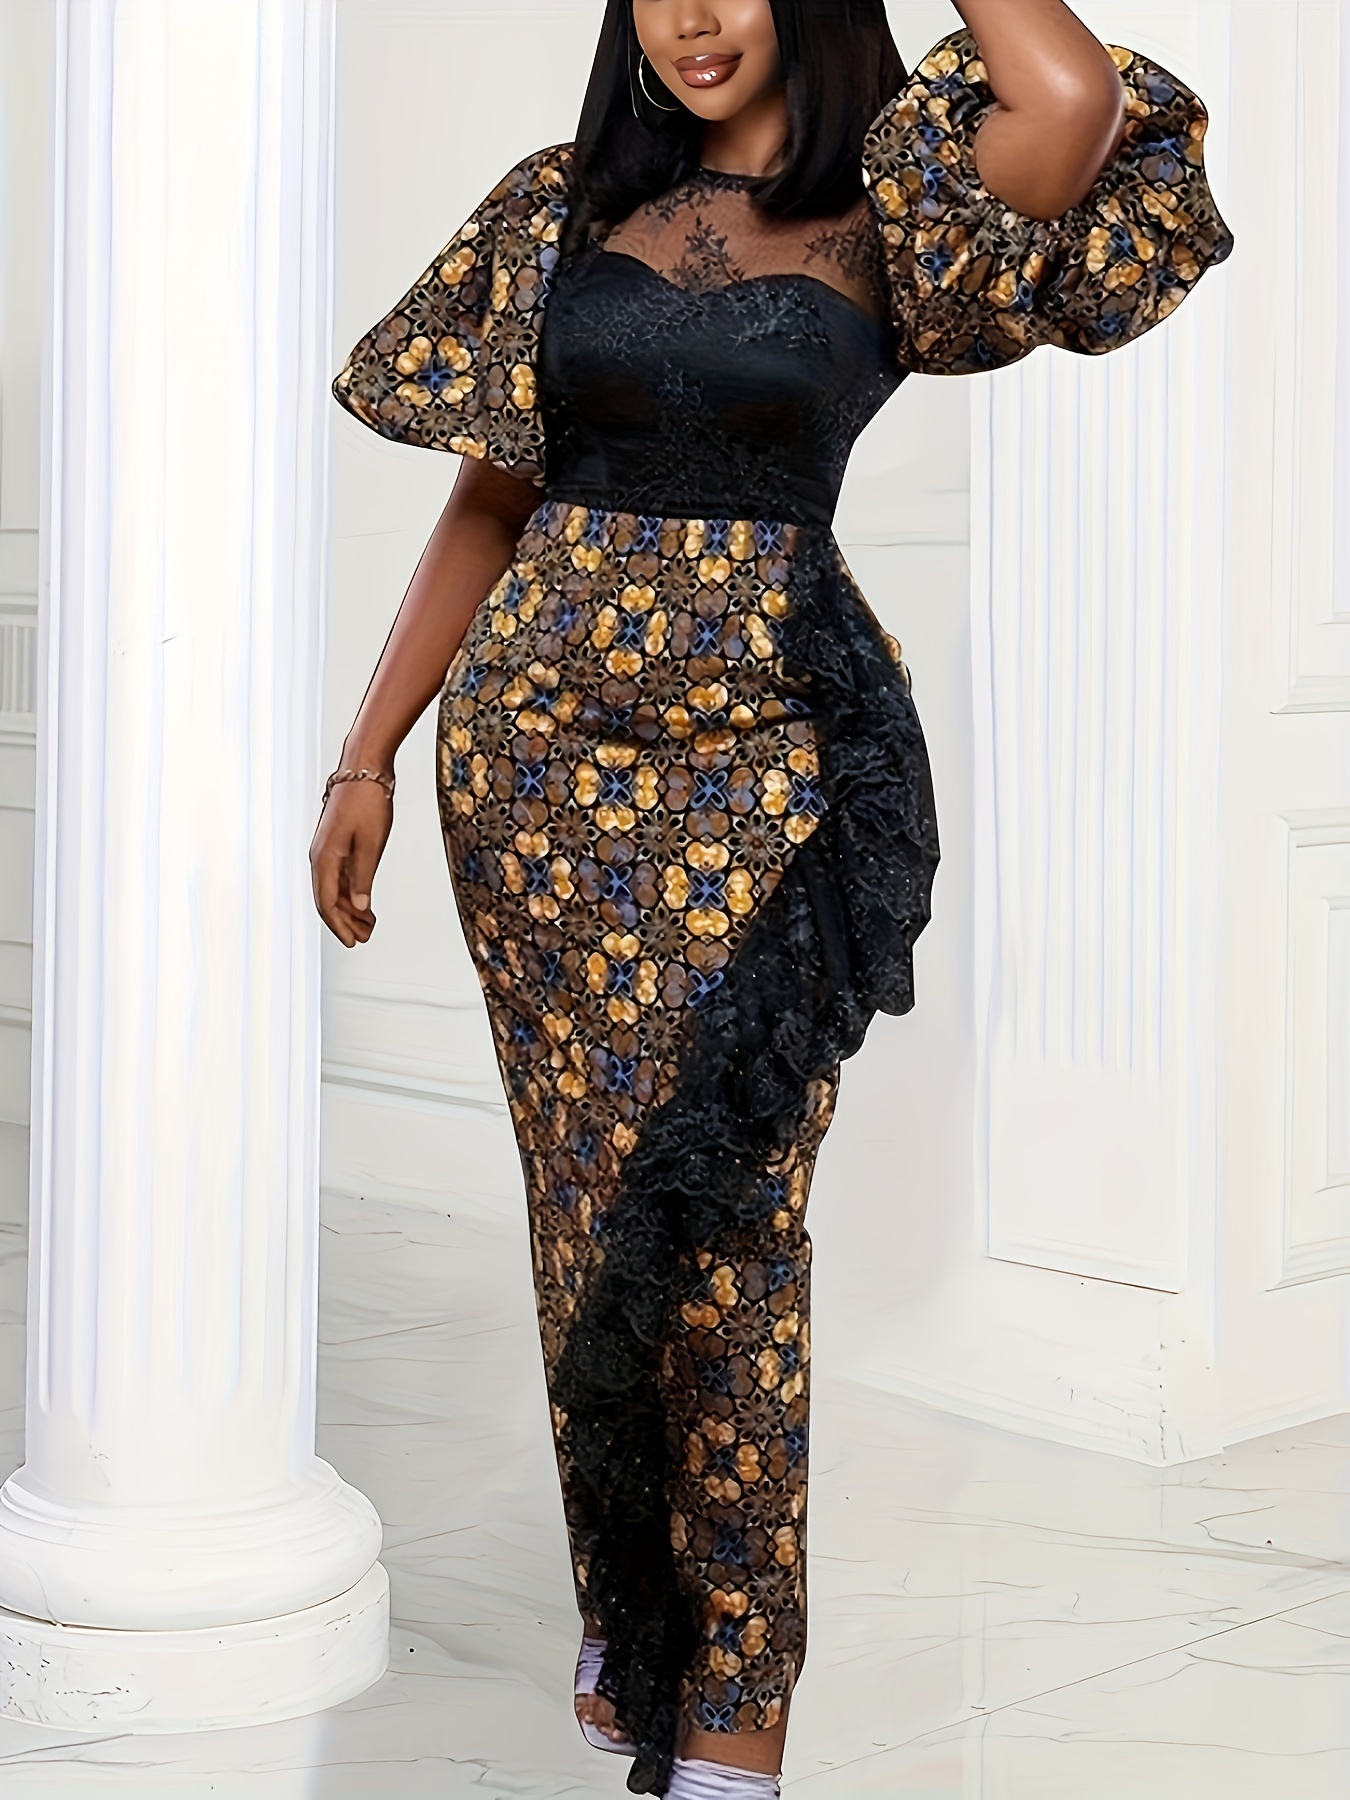 Sexy Slim Dress Plus Size African Clothes For Women Ruffle Sleeve